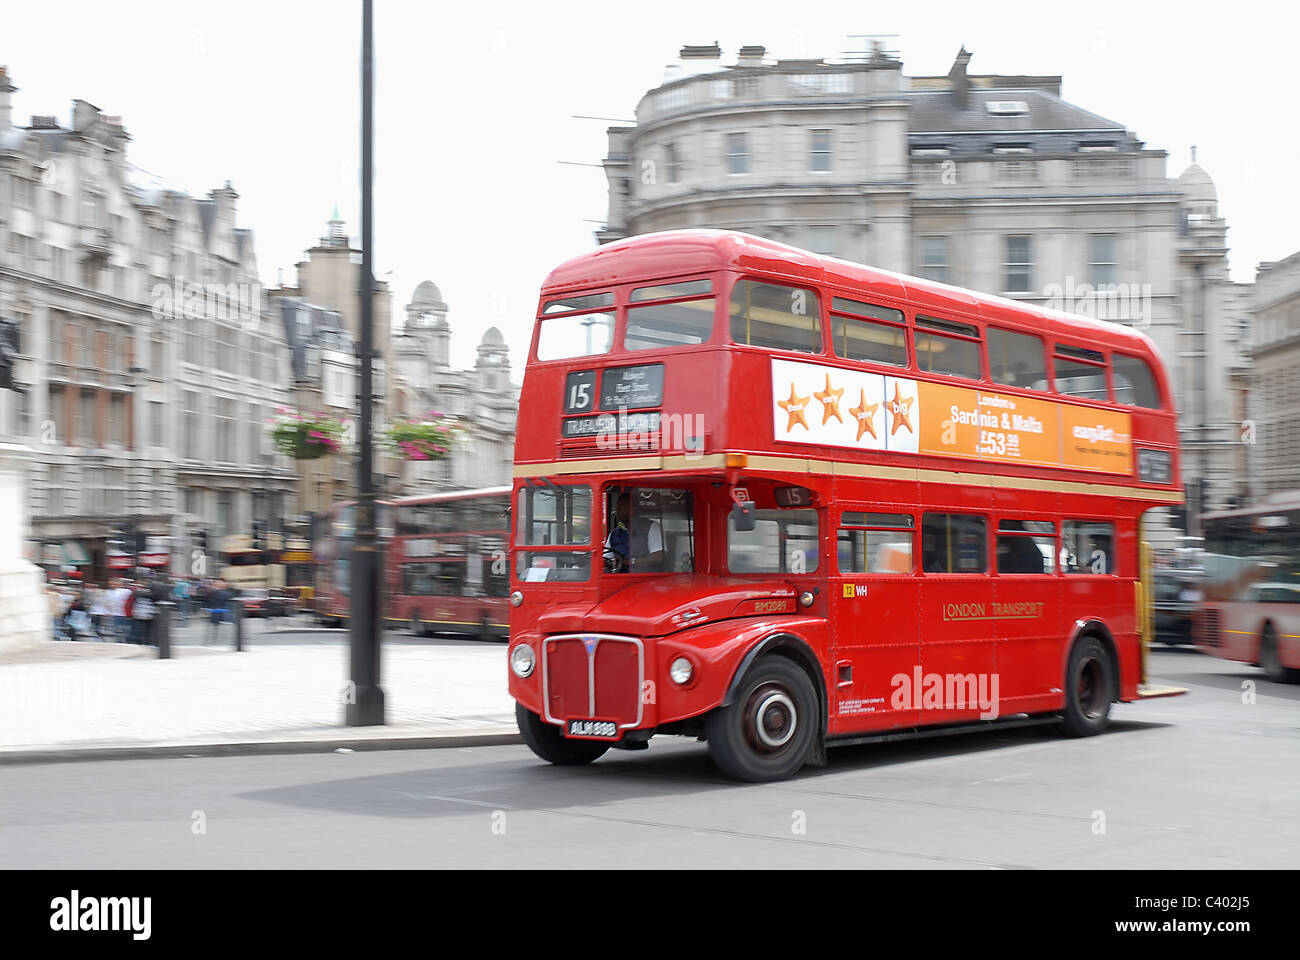 This is an image of an old double decker bus in London, UK Stock Photo